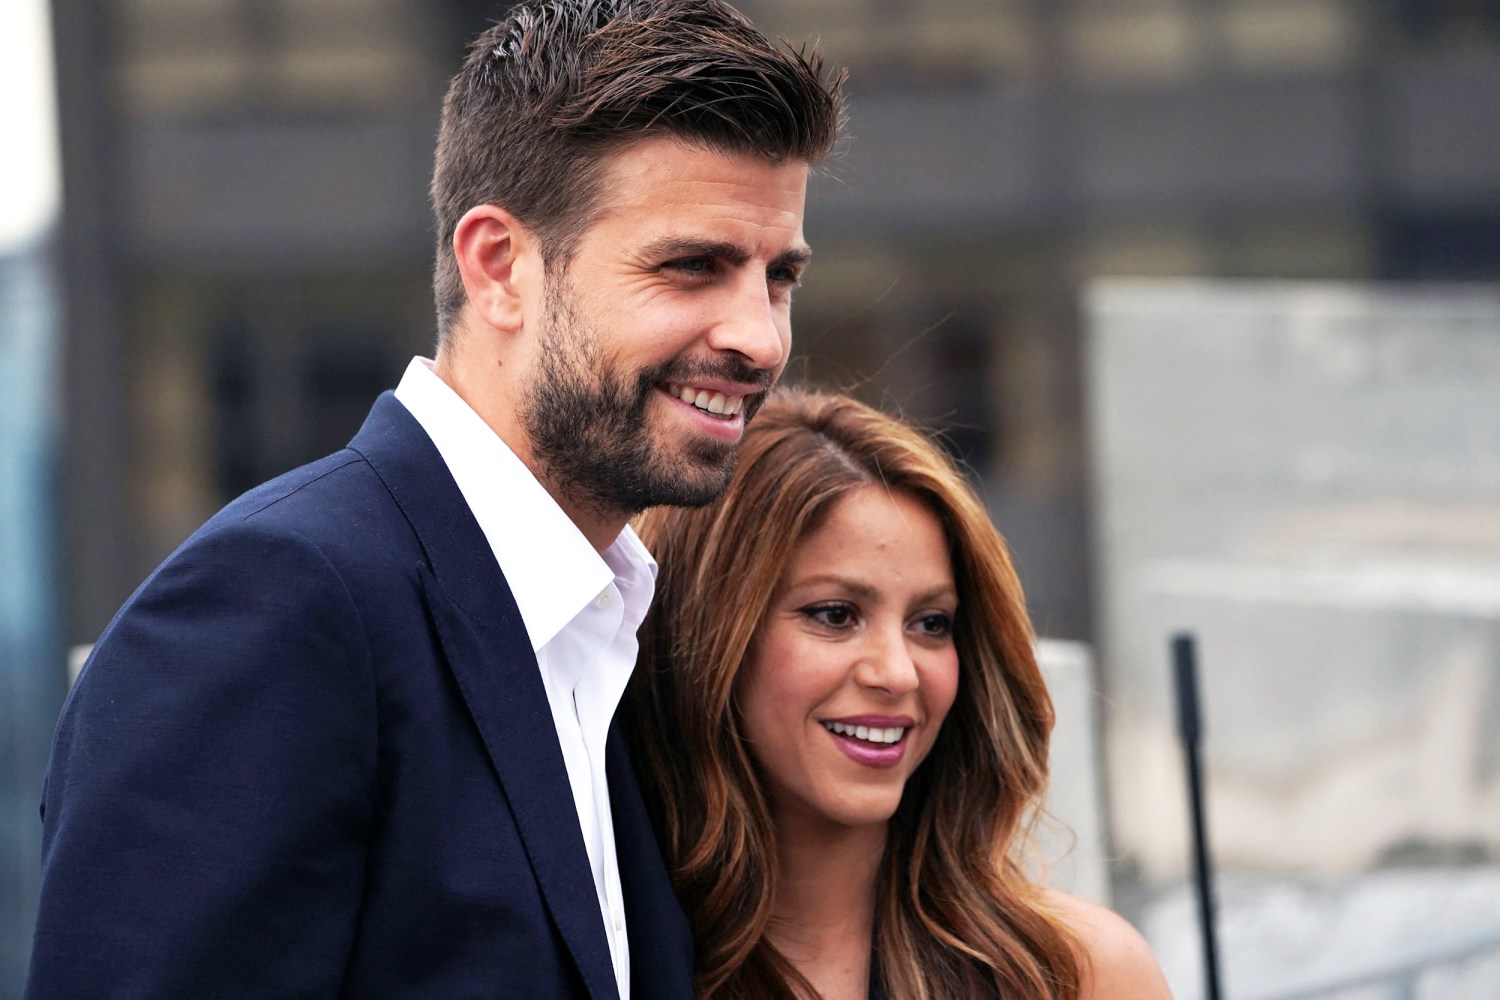 Shakira And Piqué's Body Language, Explained By An Expert